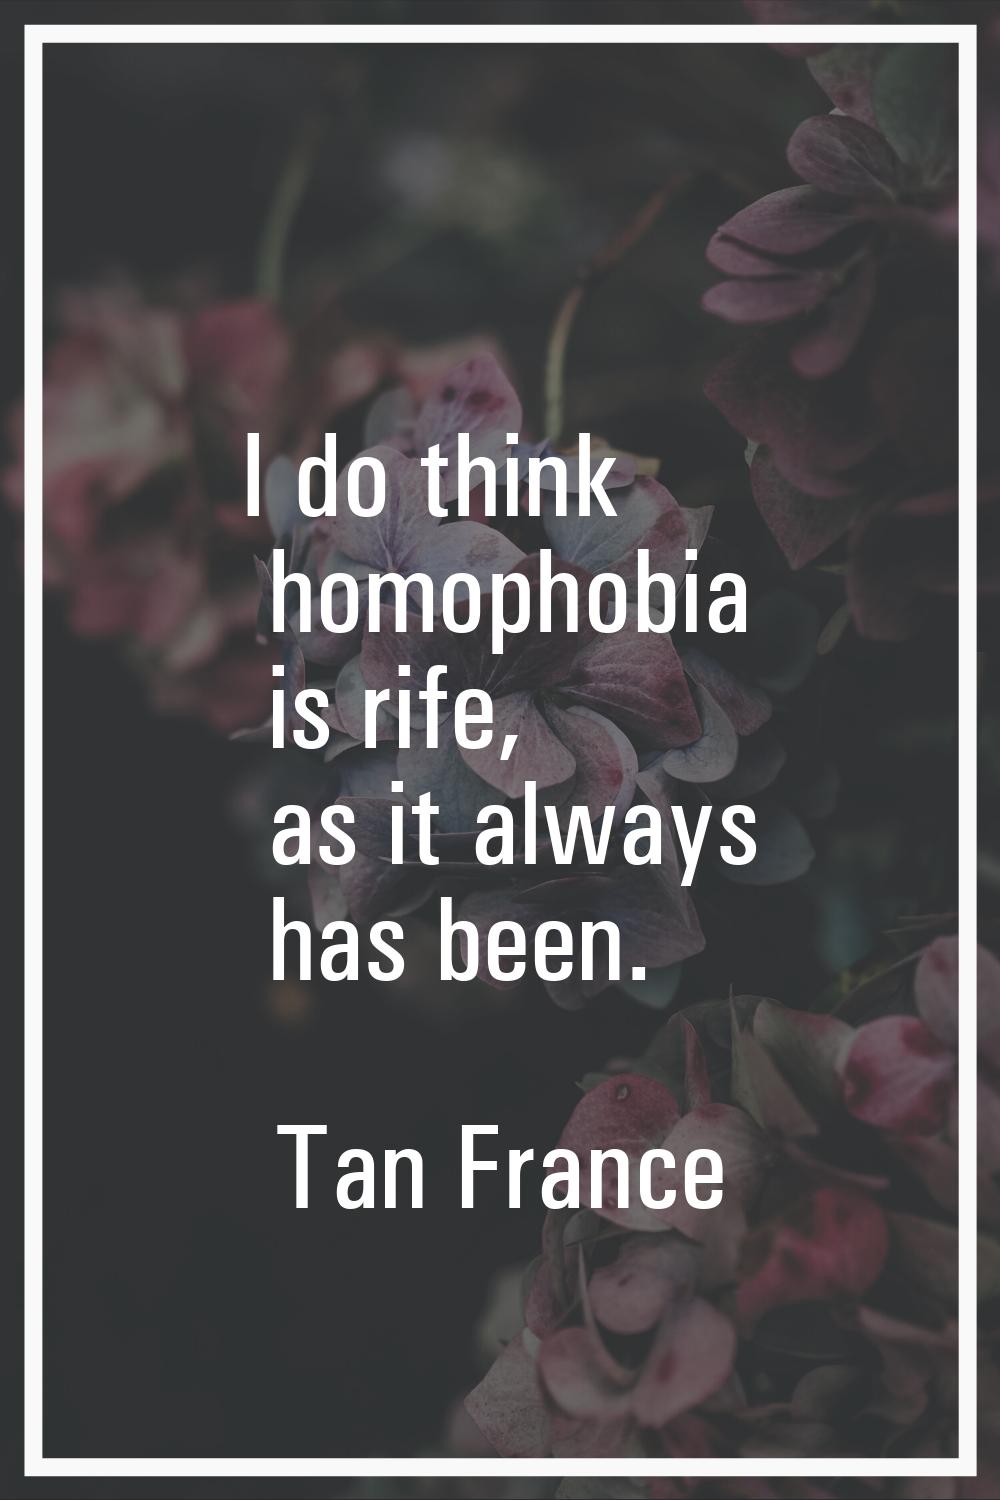 I do think homophobia is rife, as it always has been.